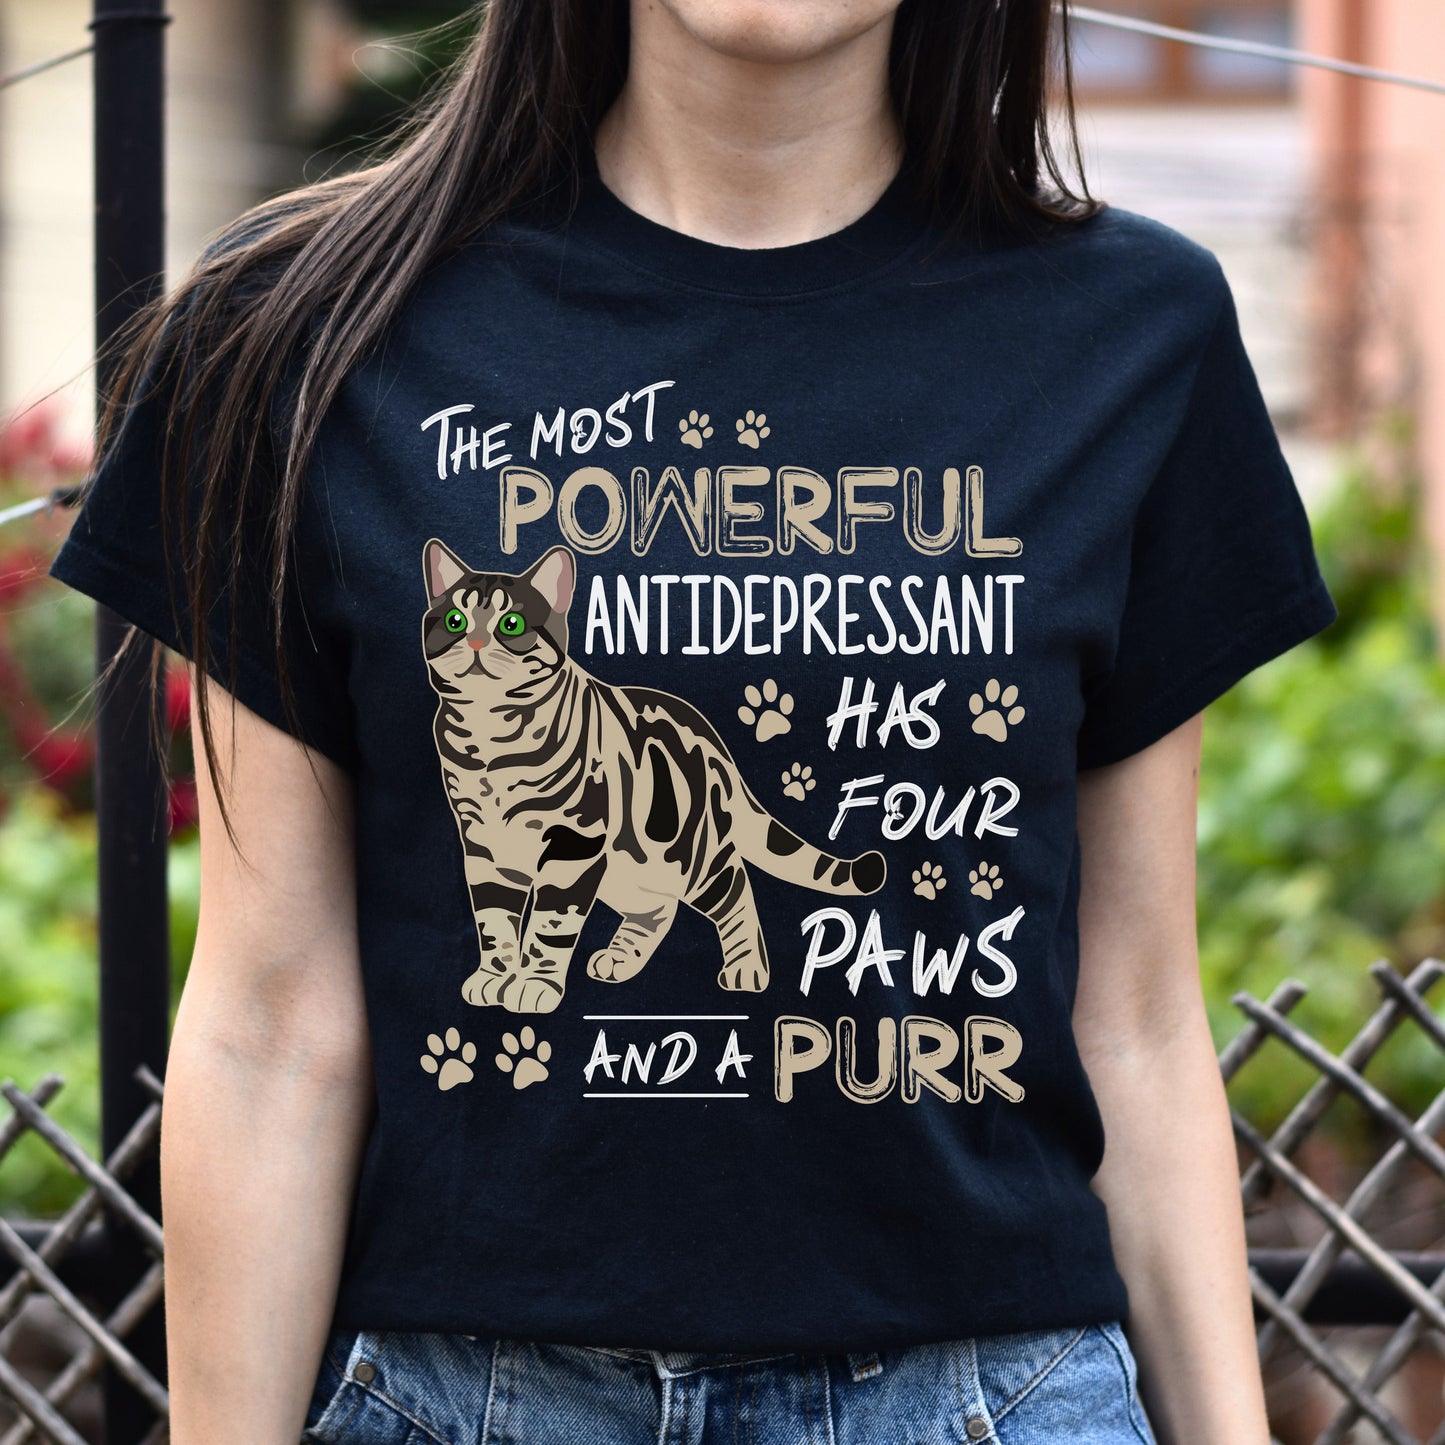 The most powerful antidepressant has four paws Unisex shirt Black Dark Heather-Black-Family-Gift-Planet